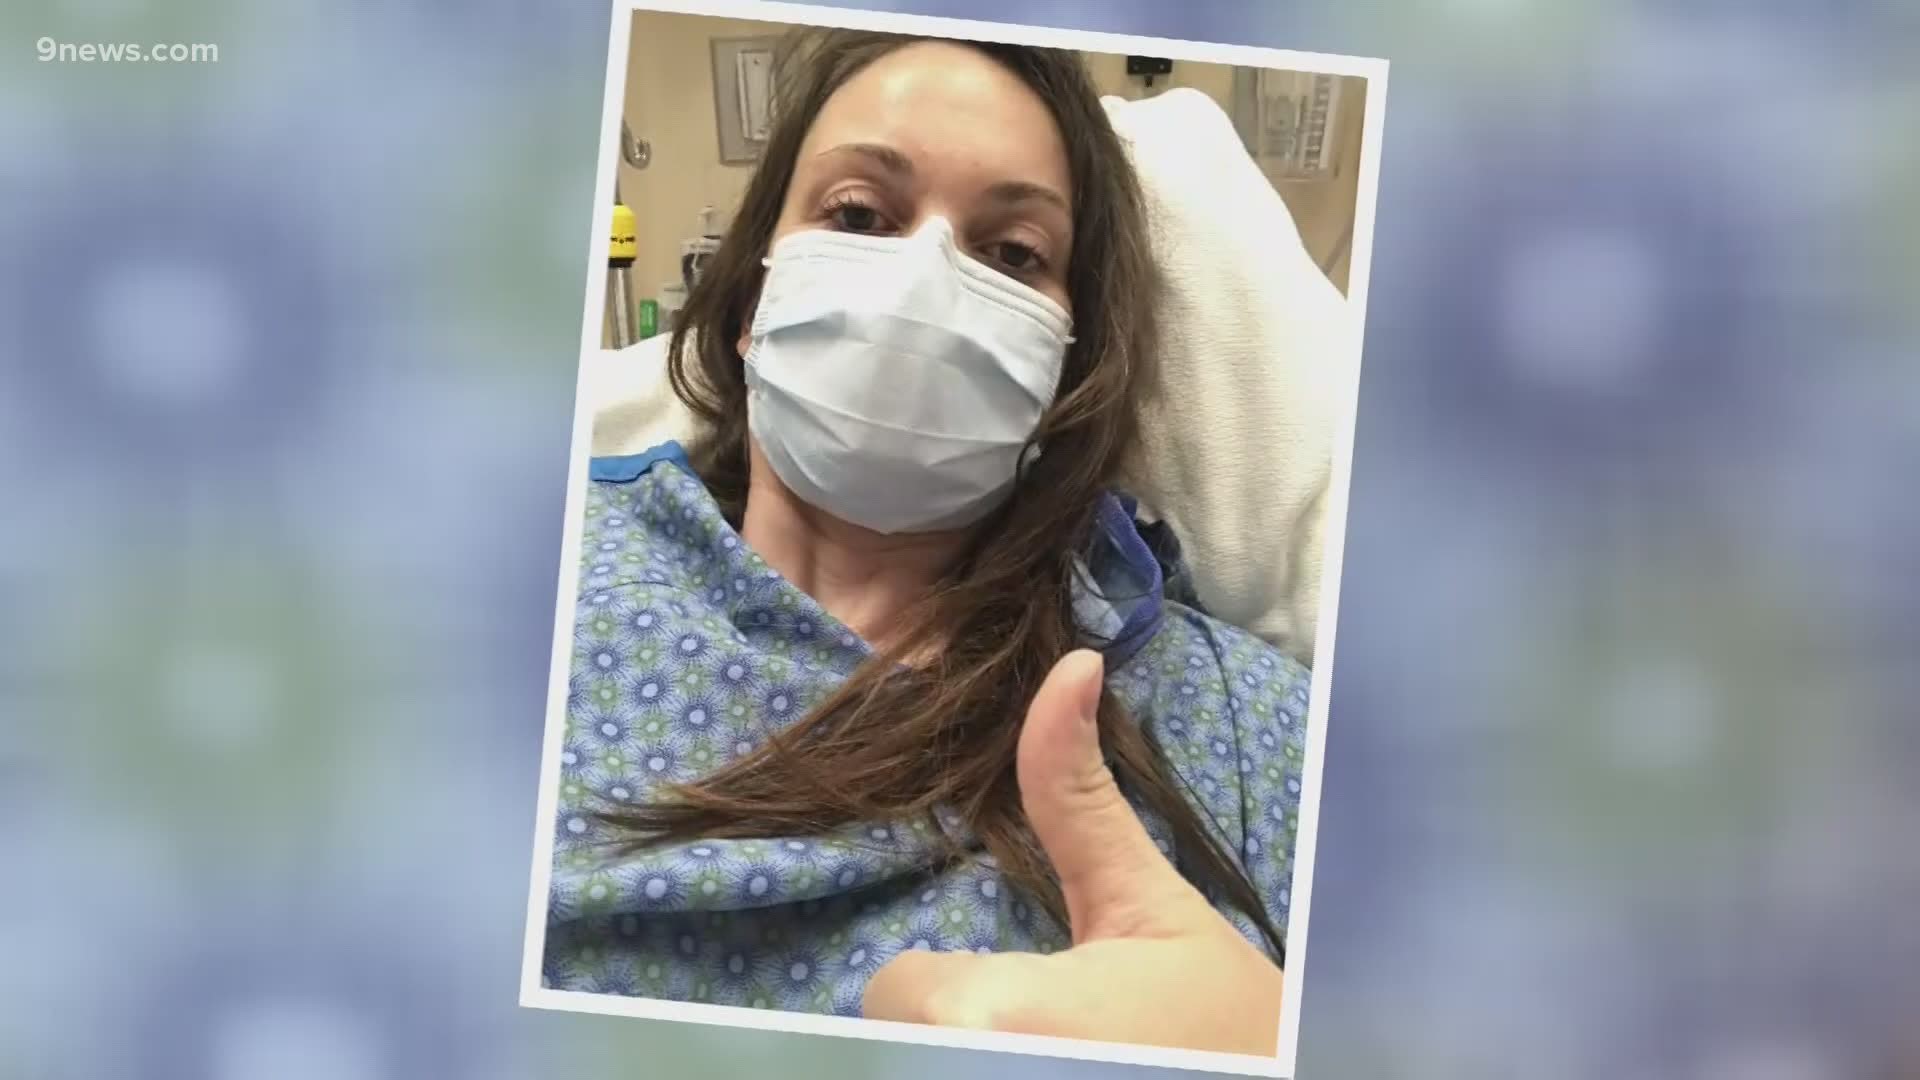 A month and a half after her first time with the virus, the woman in Lafayette found out she was positive again.